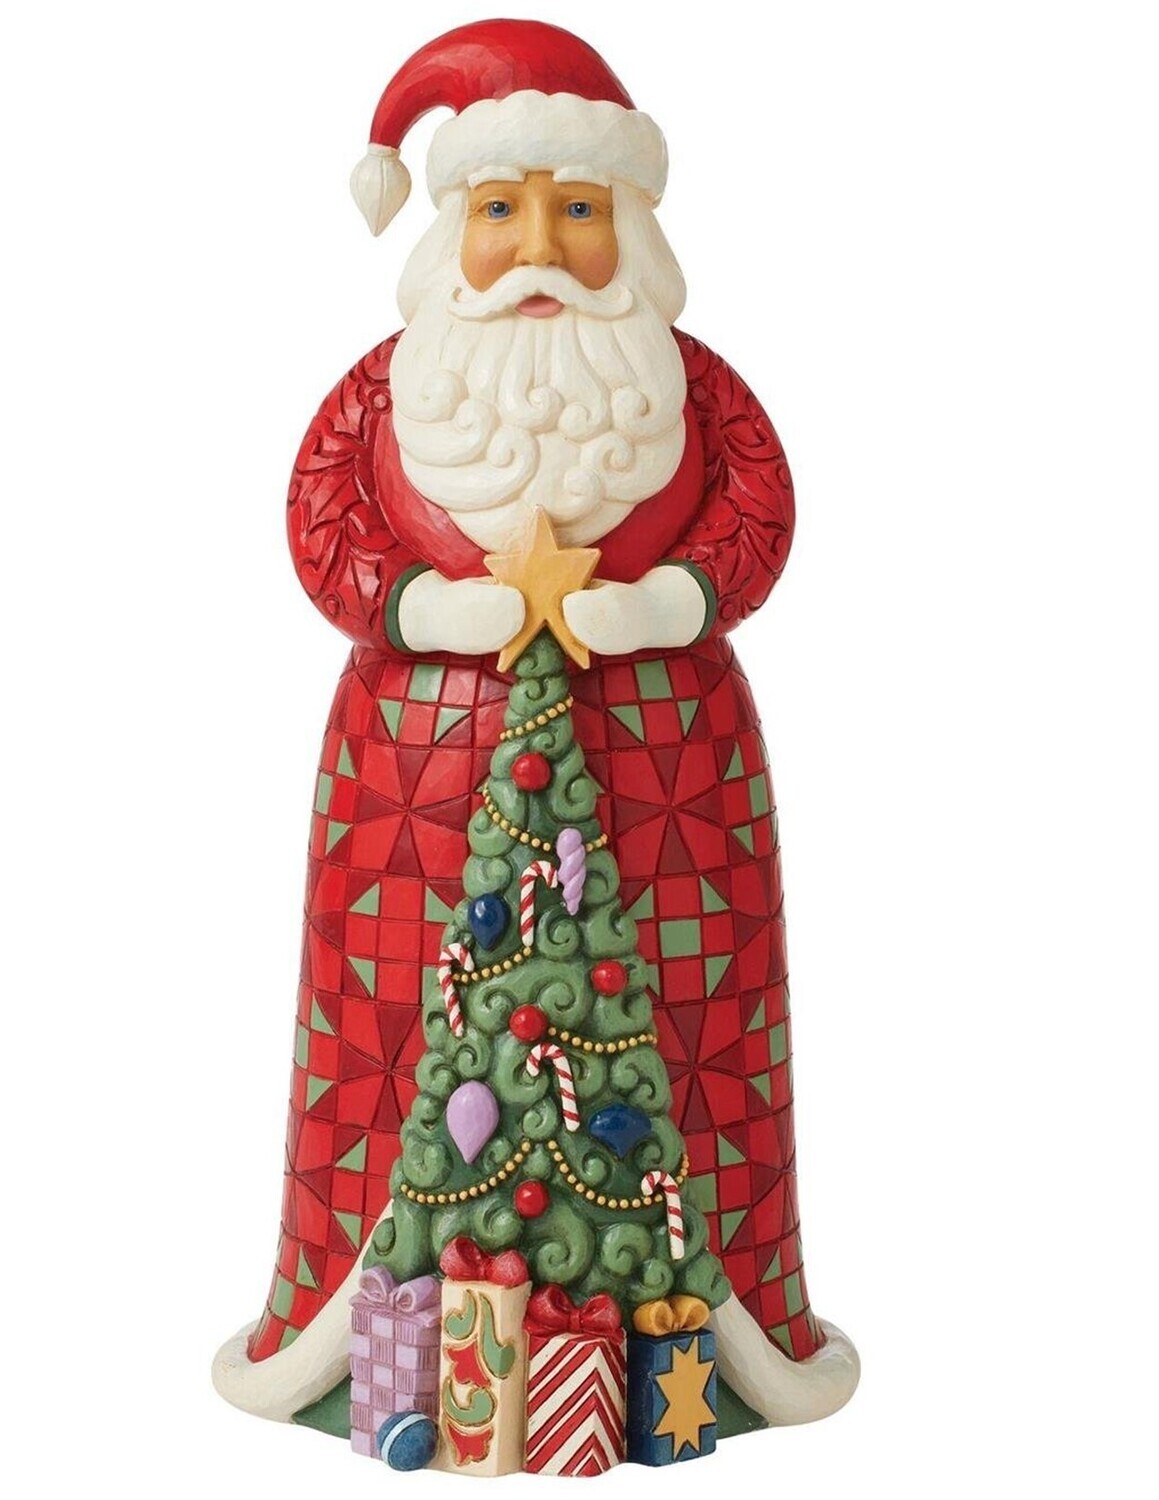 Jim Shore Heartwood Creek "From the Trees to the Trimming" Santa with Christmas Tree Figurine (6012946)